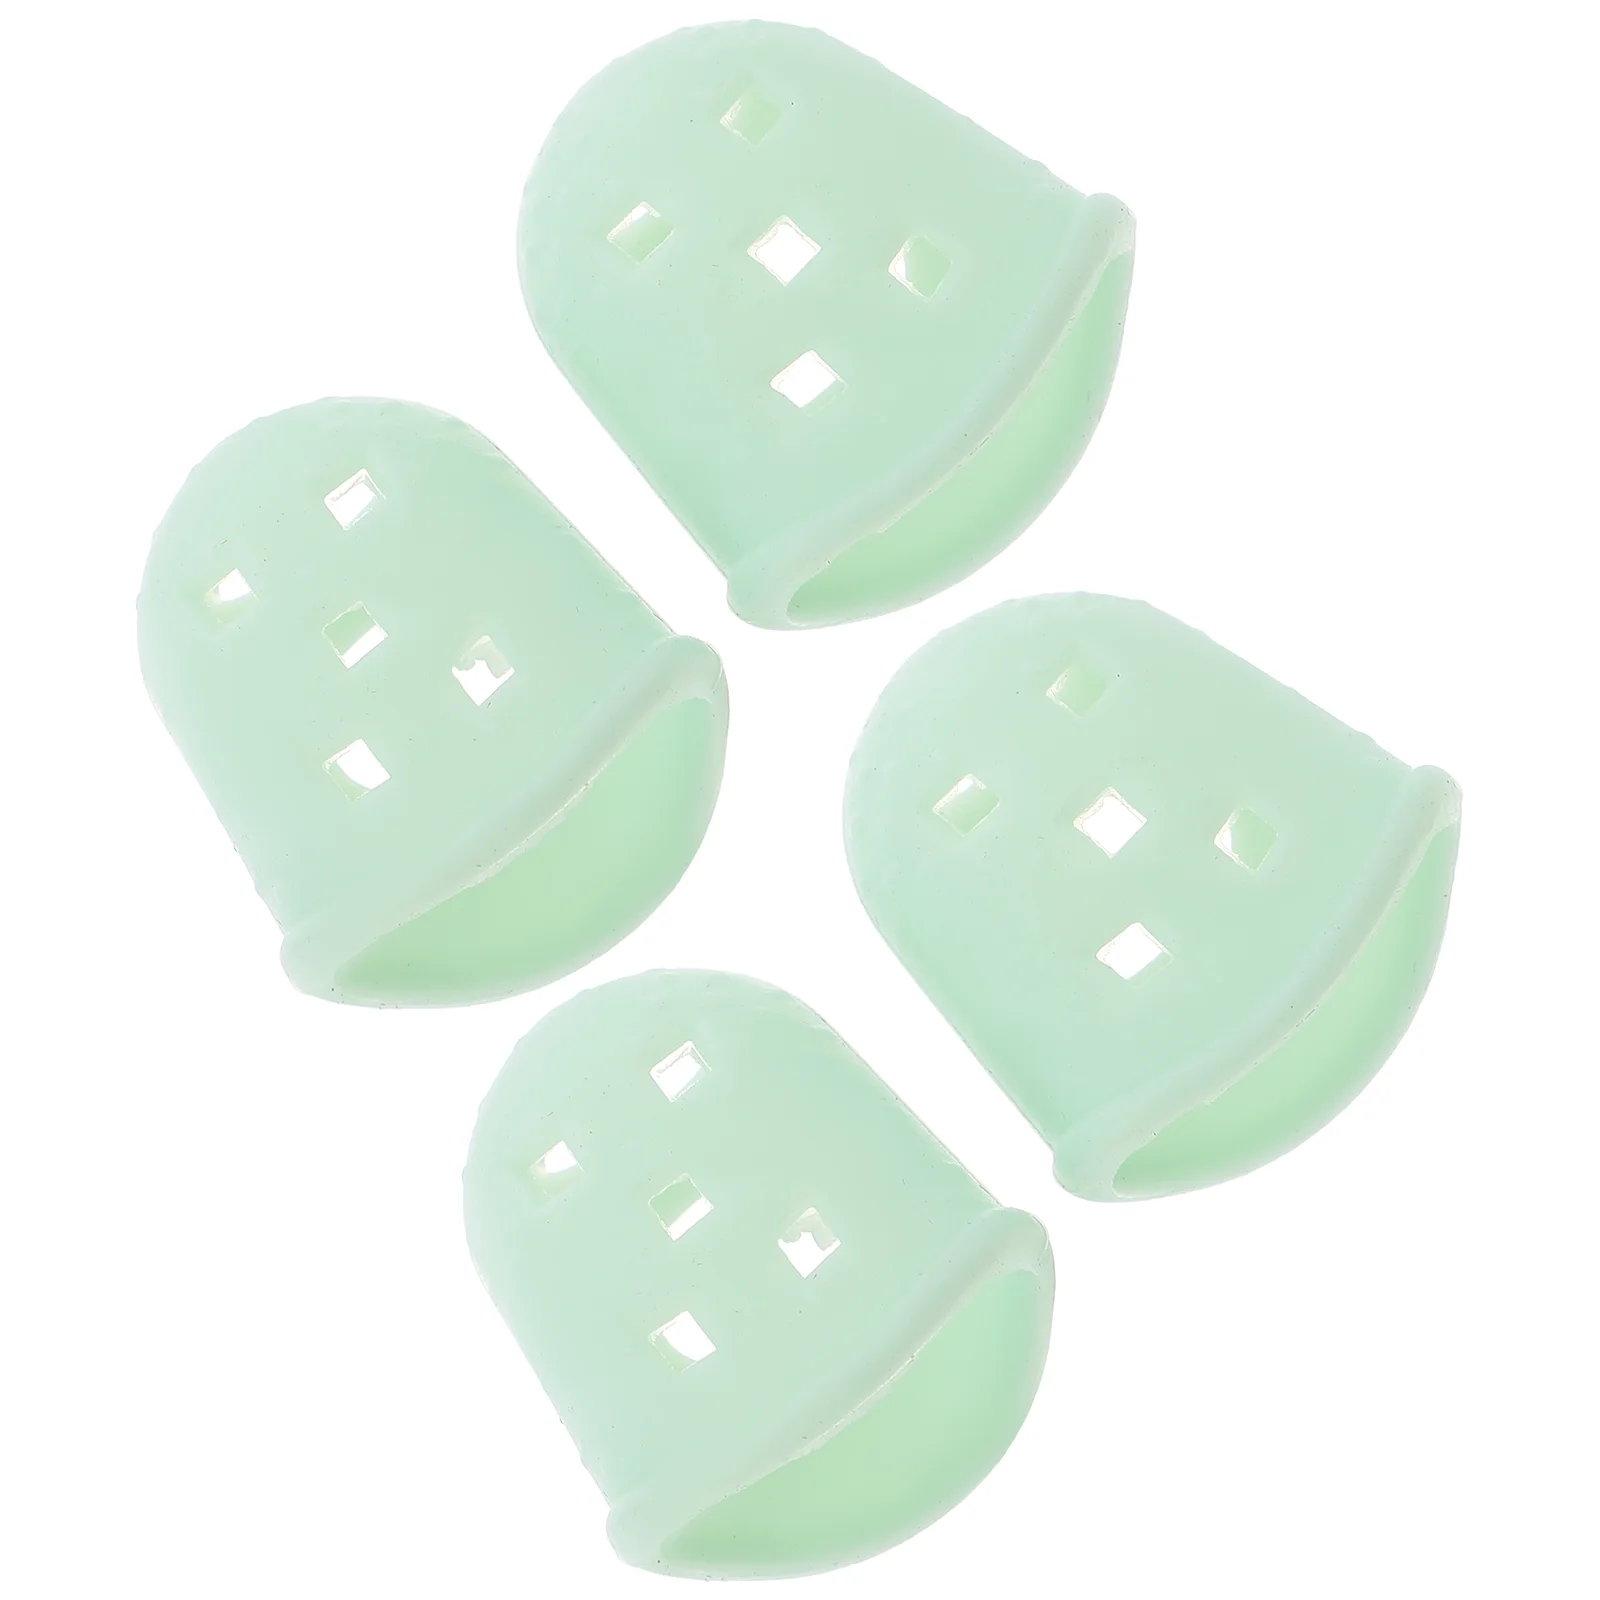 

Kalimba Finger Cots Practice Supplies Silicone Thumb Covers Protectors Fingertip Caps Anti-pain